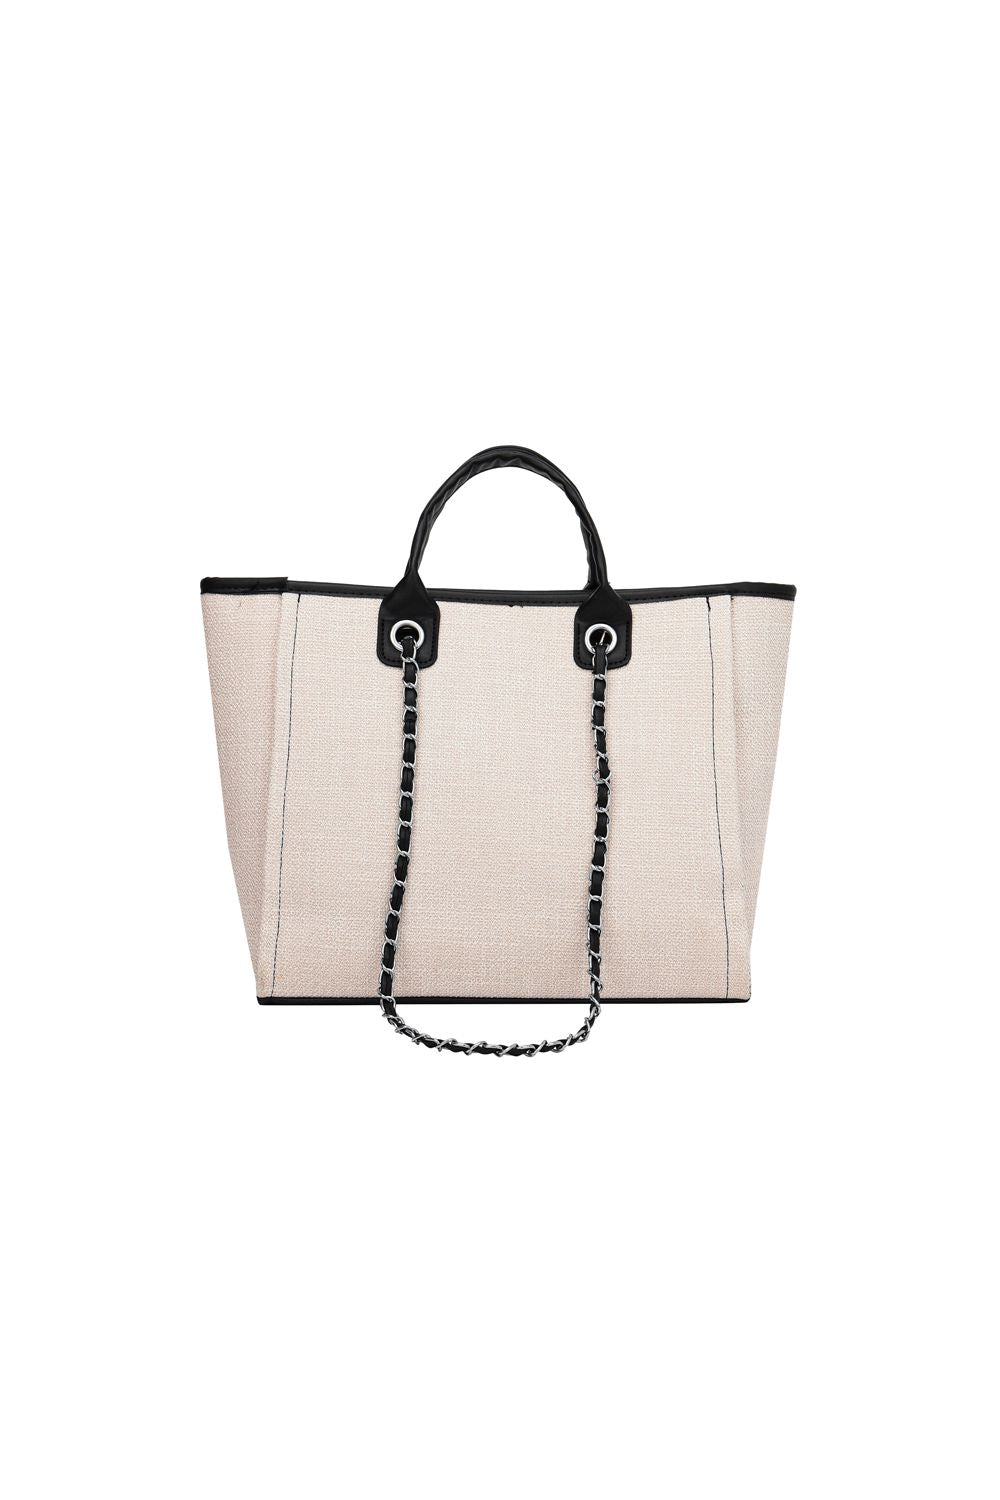 Adored Polyester Tote Bag Beige Black One Size